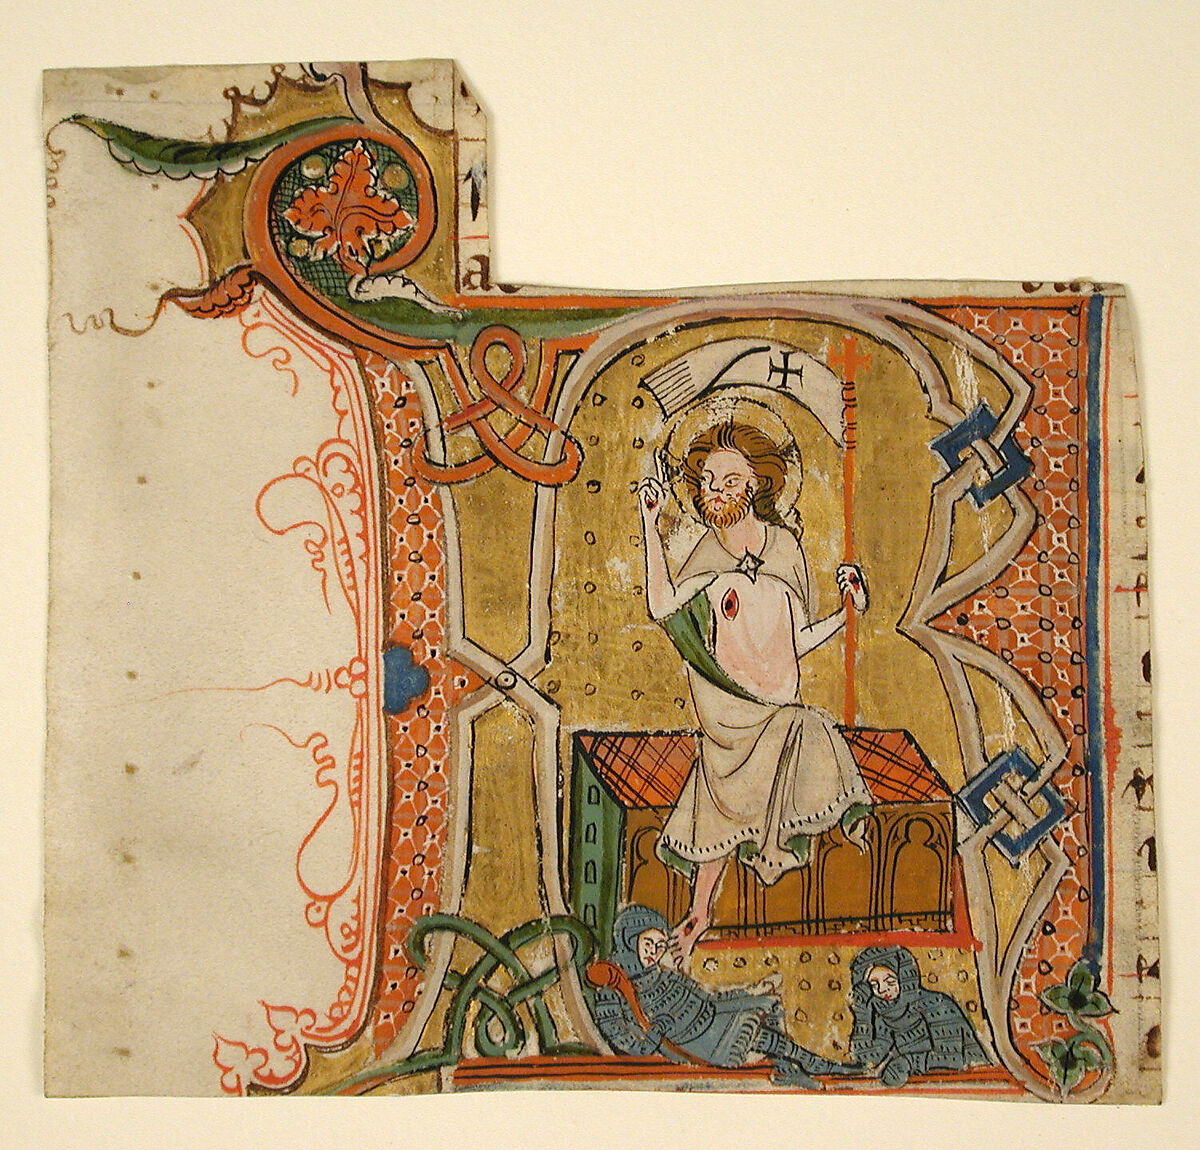 Manuscript Leaf Showing an Illuminated Initial R with The Resurrection, Parchment, tempera, ink, metal leaf, Rhenish 